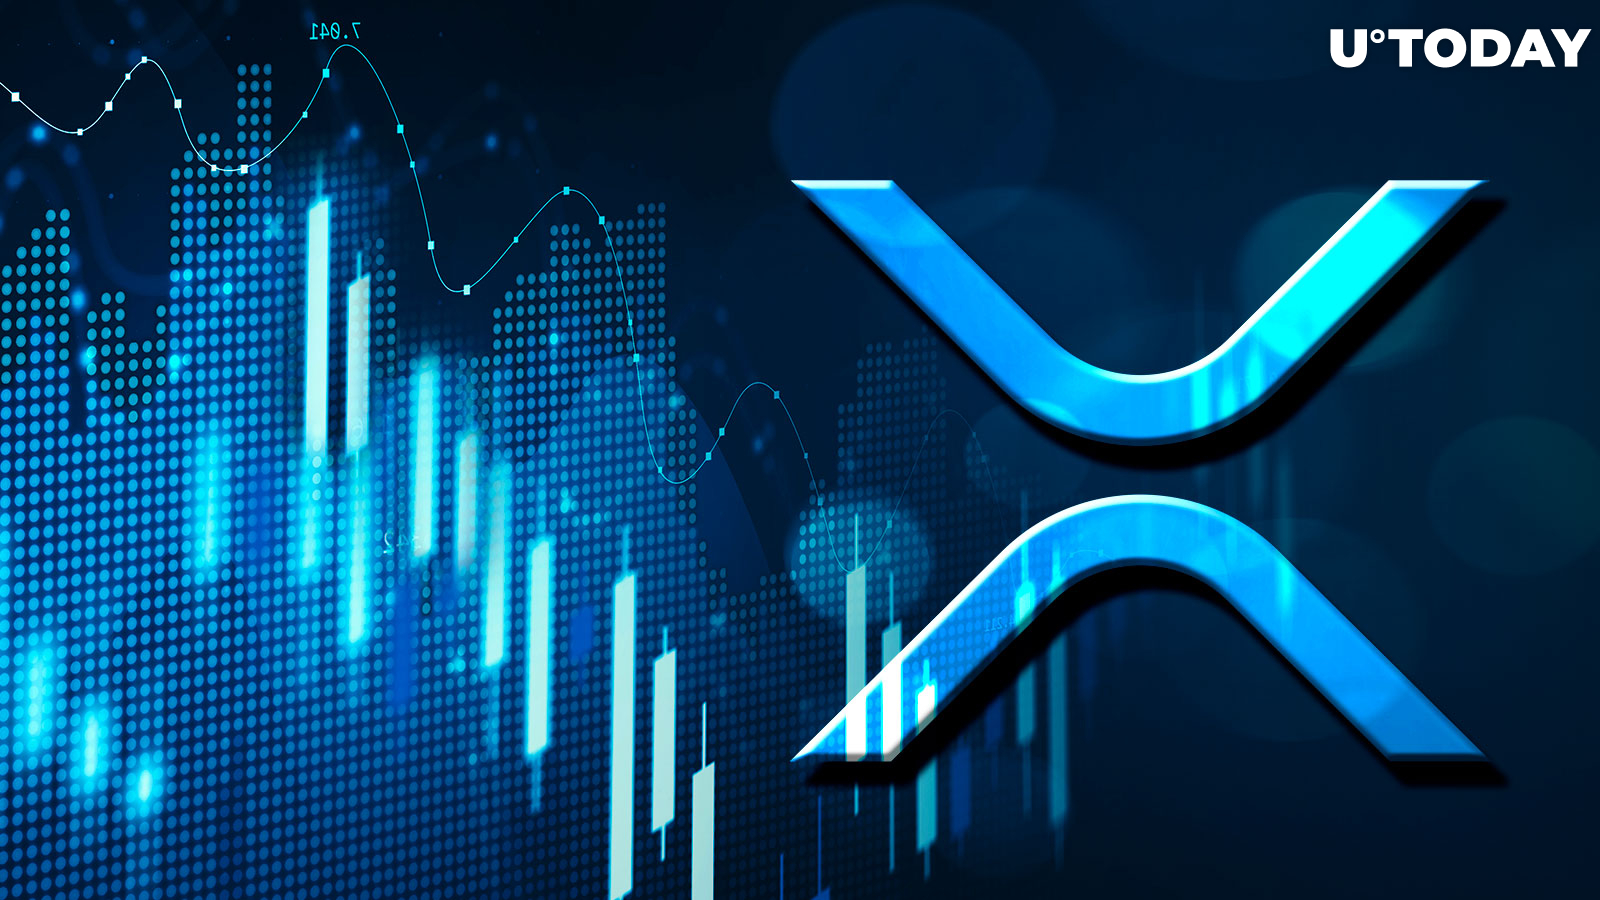 XRP Loses 10%, Drops Below Binance's Stablecoin by Market Cap